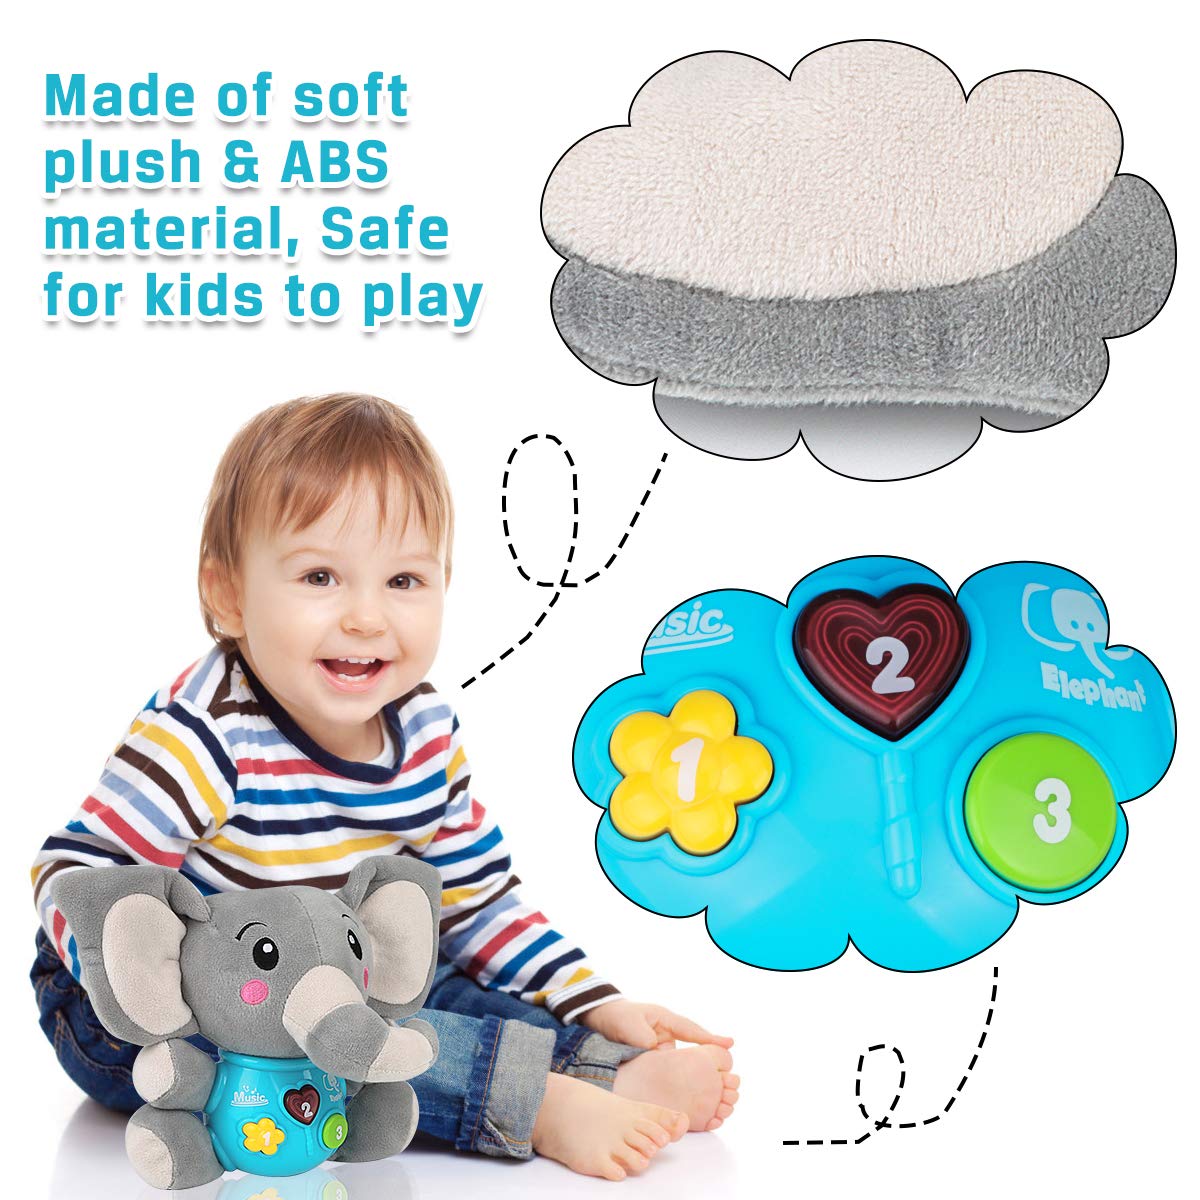 Aitbay Plush Elephant Music Baby Toys 0 3 6 9 12 Months, Cute Stuffed Aminal Light Up Baby Toys Newborn Baby Musical Toys for Infant Babies Boys & Girls Toddlers 0 to 36 Months (Gray)